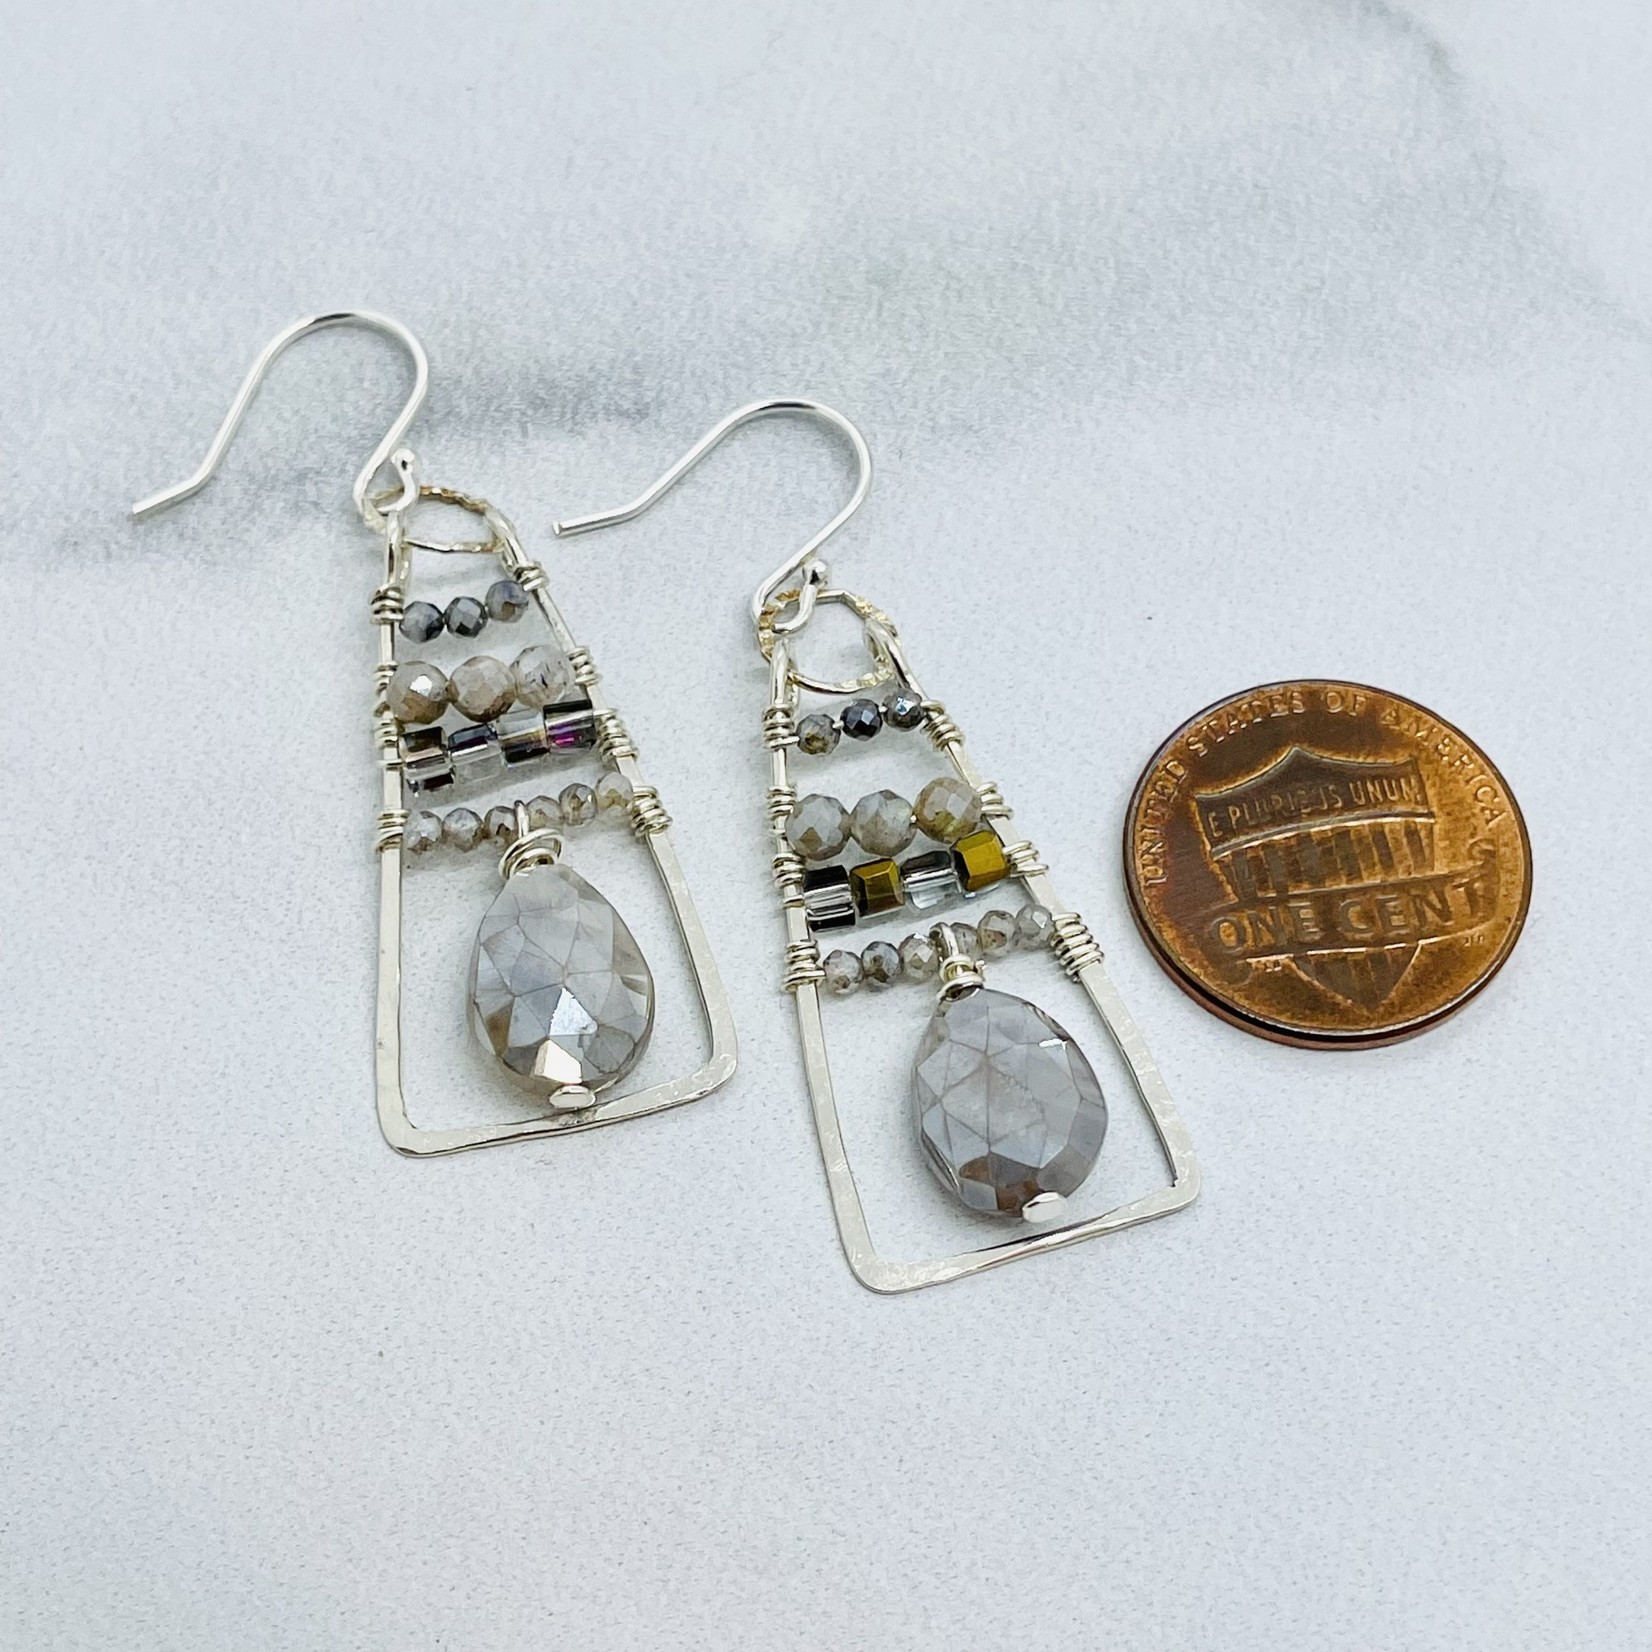 Handmade Earrings by Art By Any Means